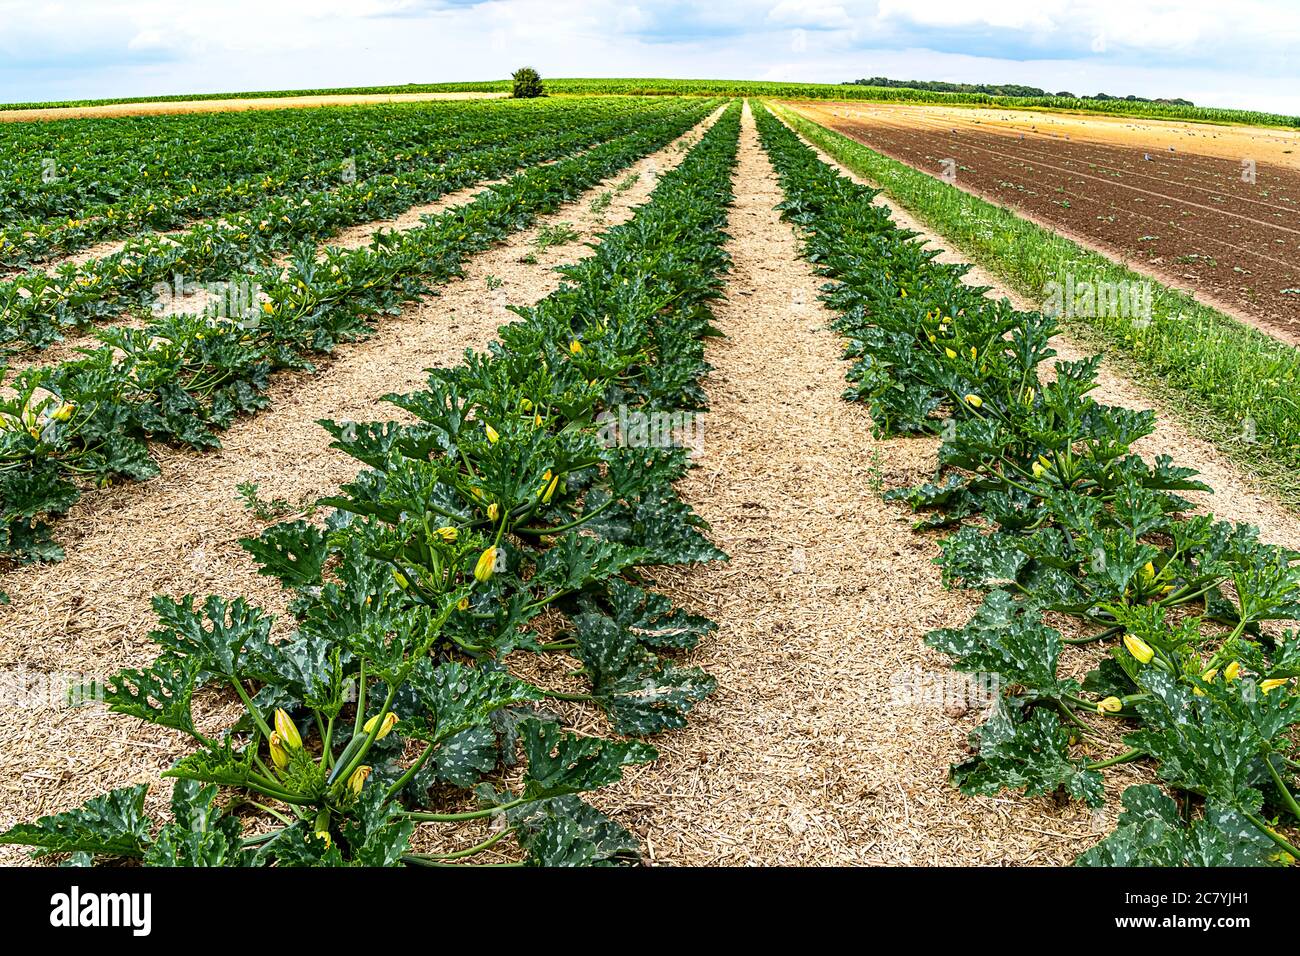 Organic farming in Germany- Rows of growing young Courgette plants in a field. Stock Photo